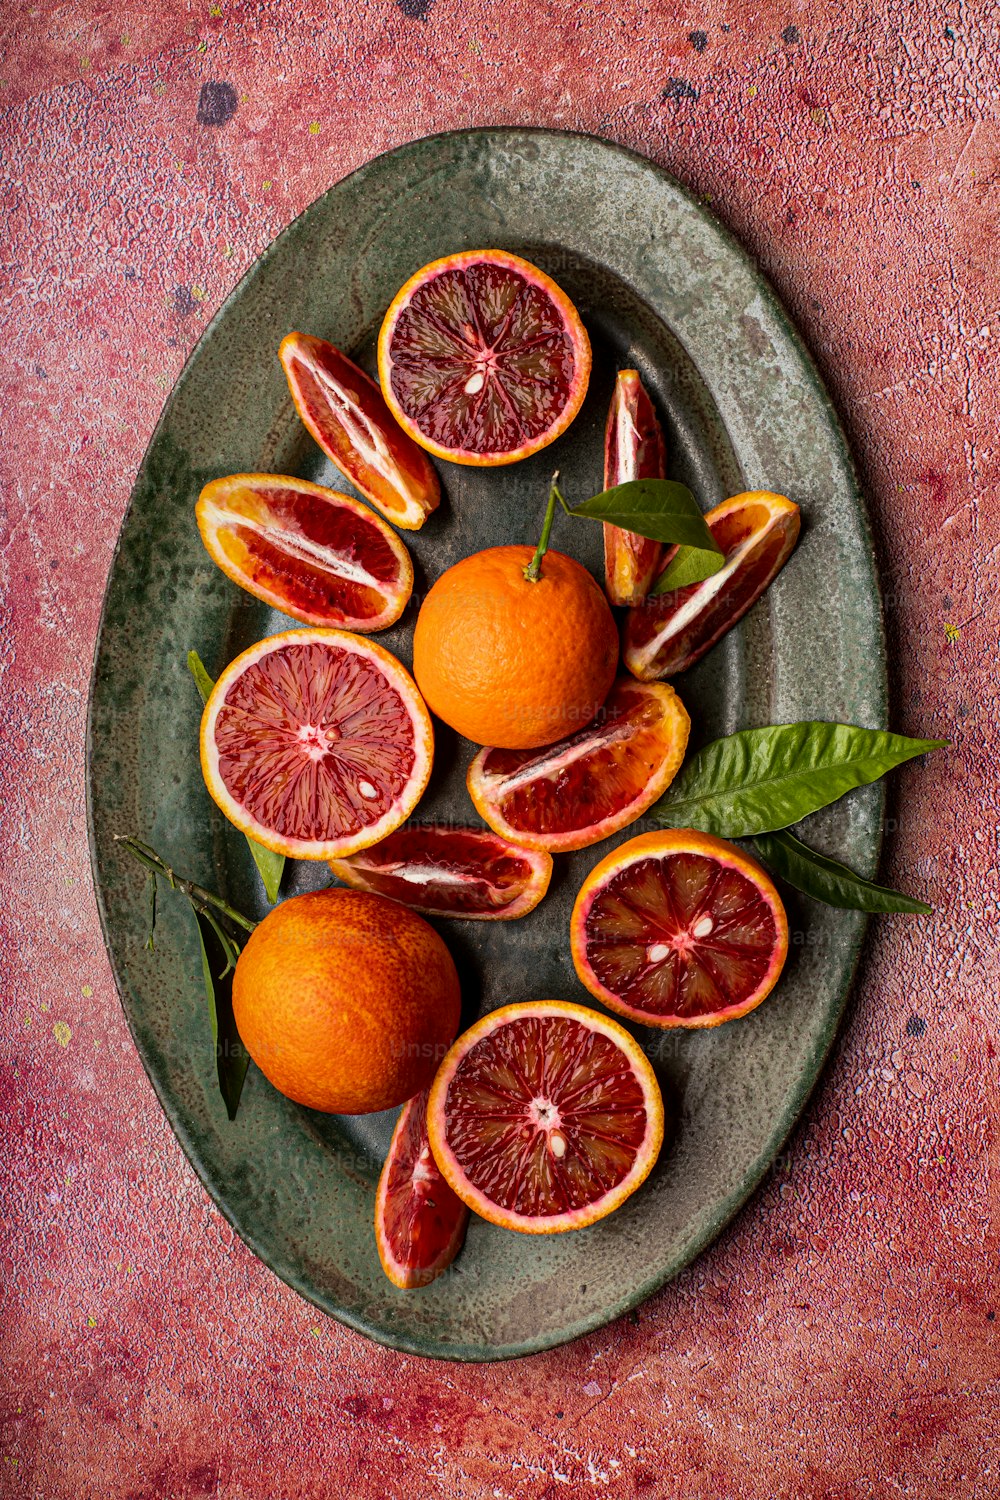 a plate of blood oranges with leaves on a table